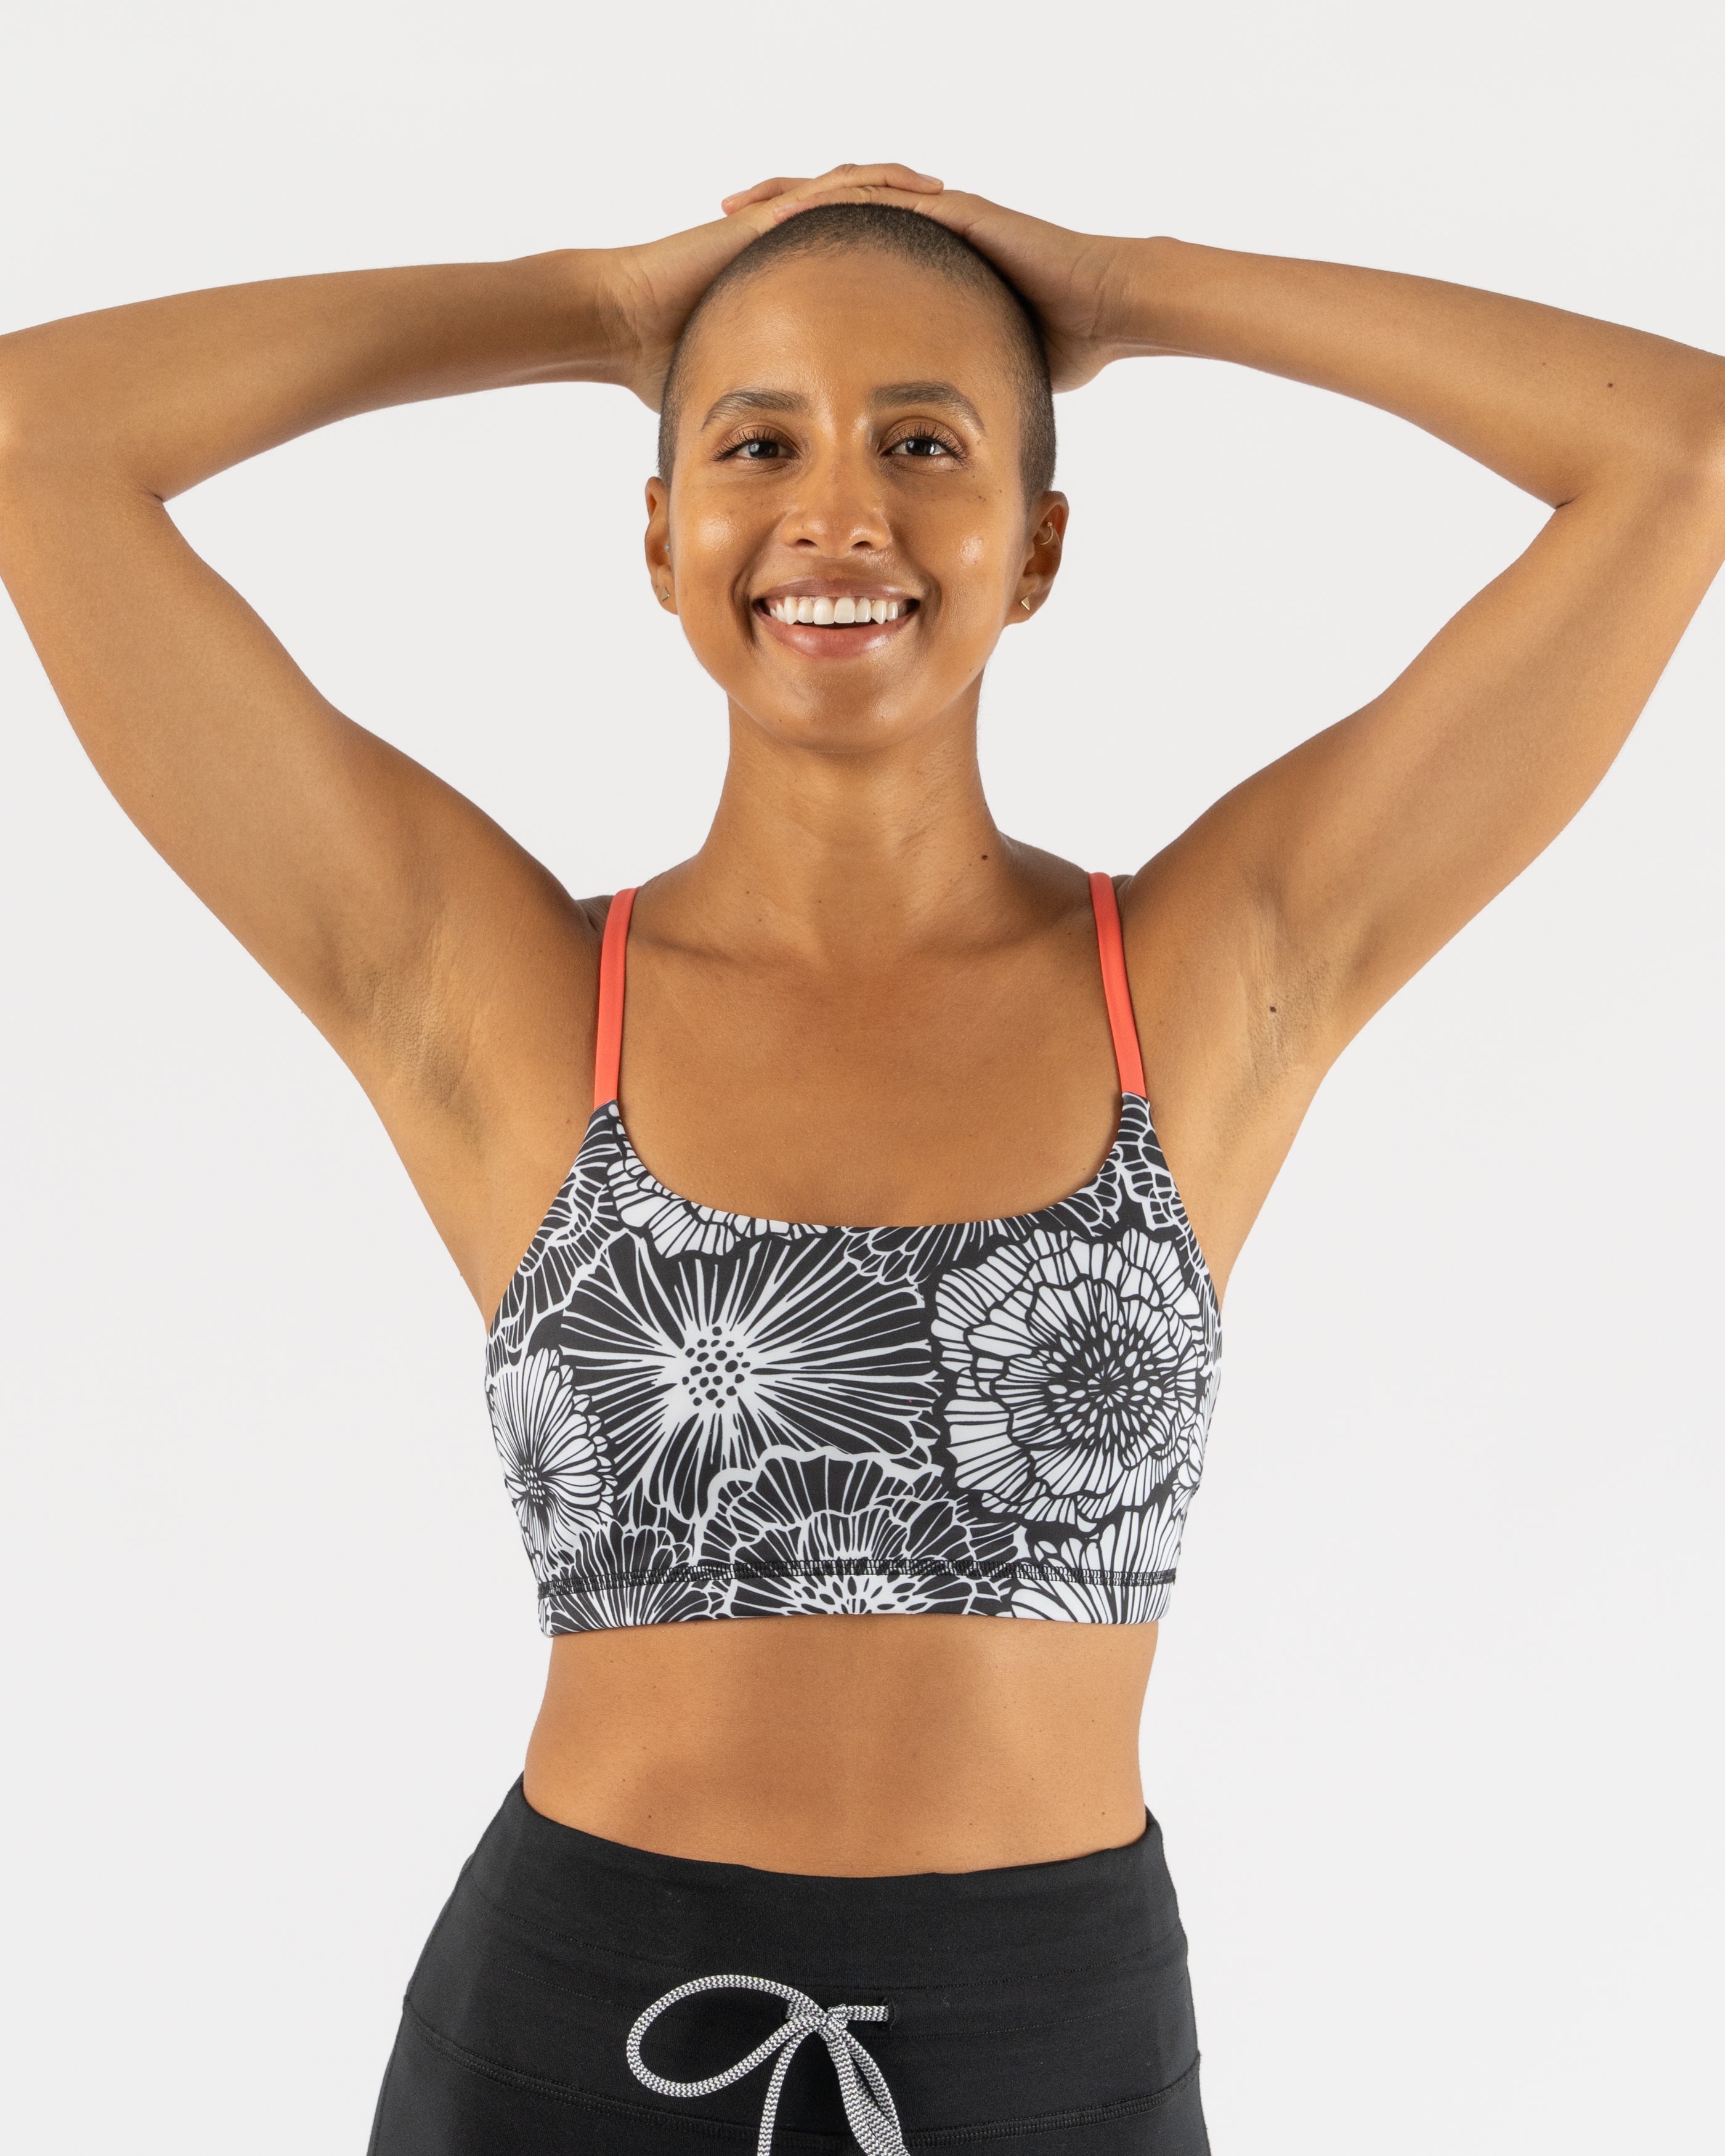 Women's - Fitted Fit Sport Bras or Long Sleeves or Hoodies and Sweatshirts  or Graphics in Pink or White or Orange for Running